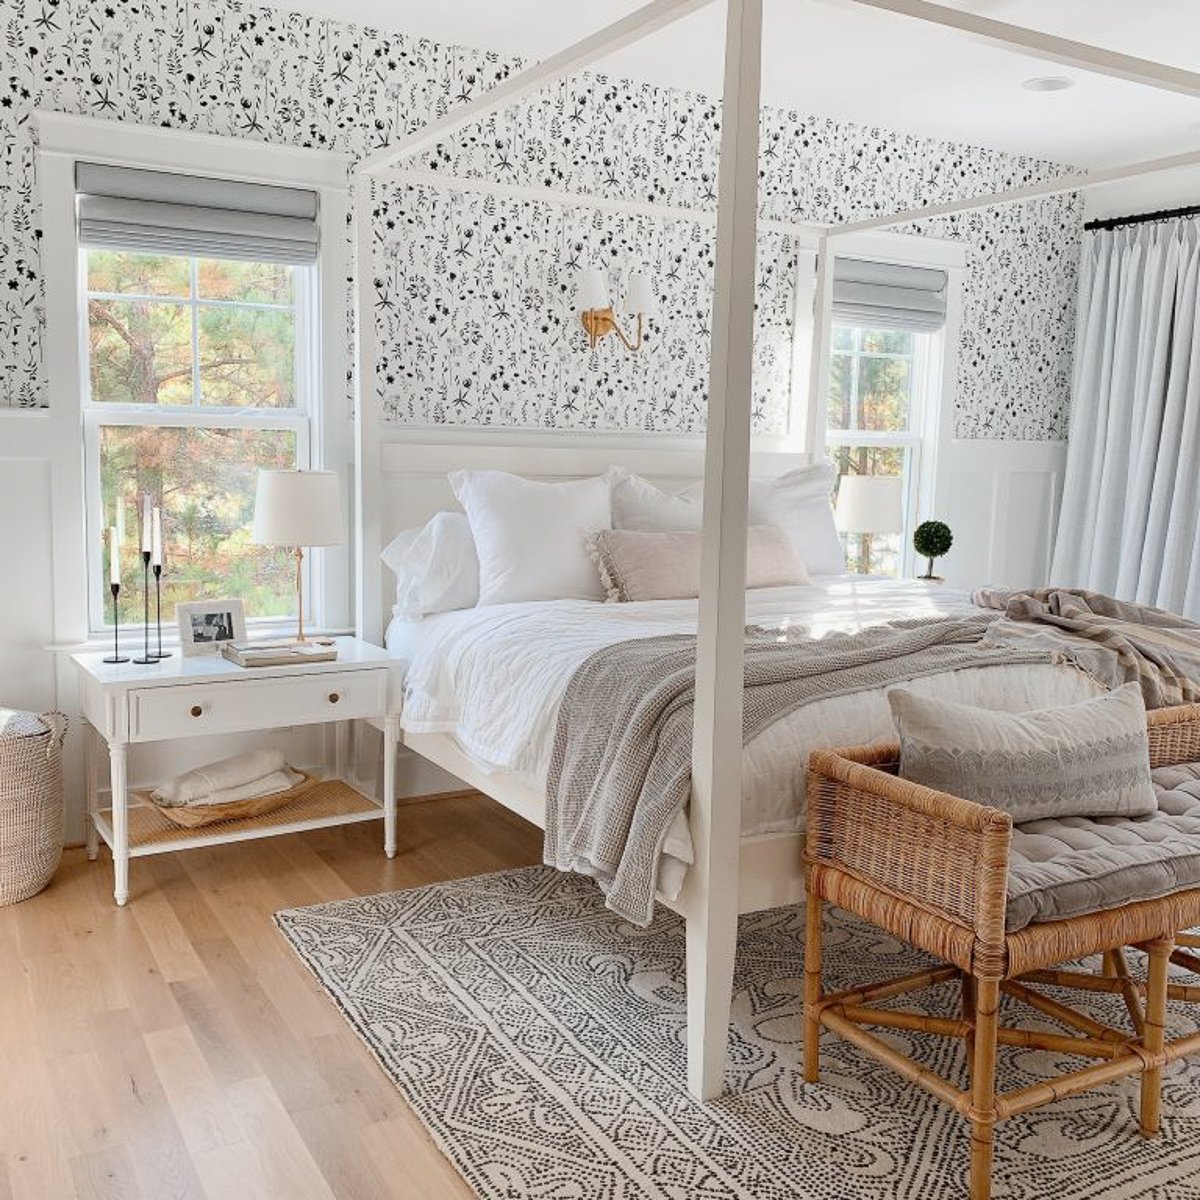 8 Ideas For Decorating That Awkward Space Over Your Bed